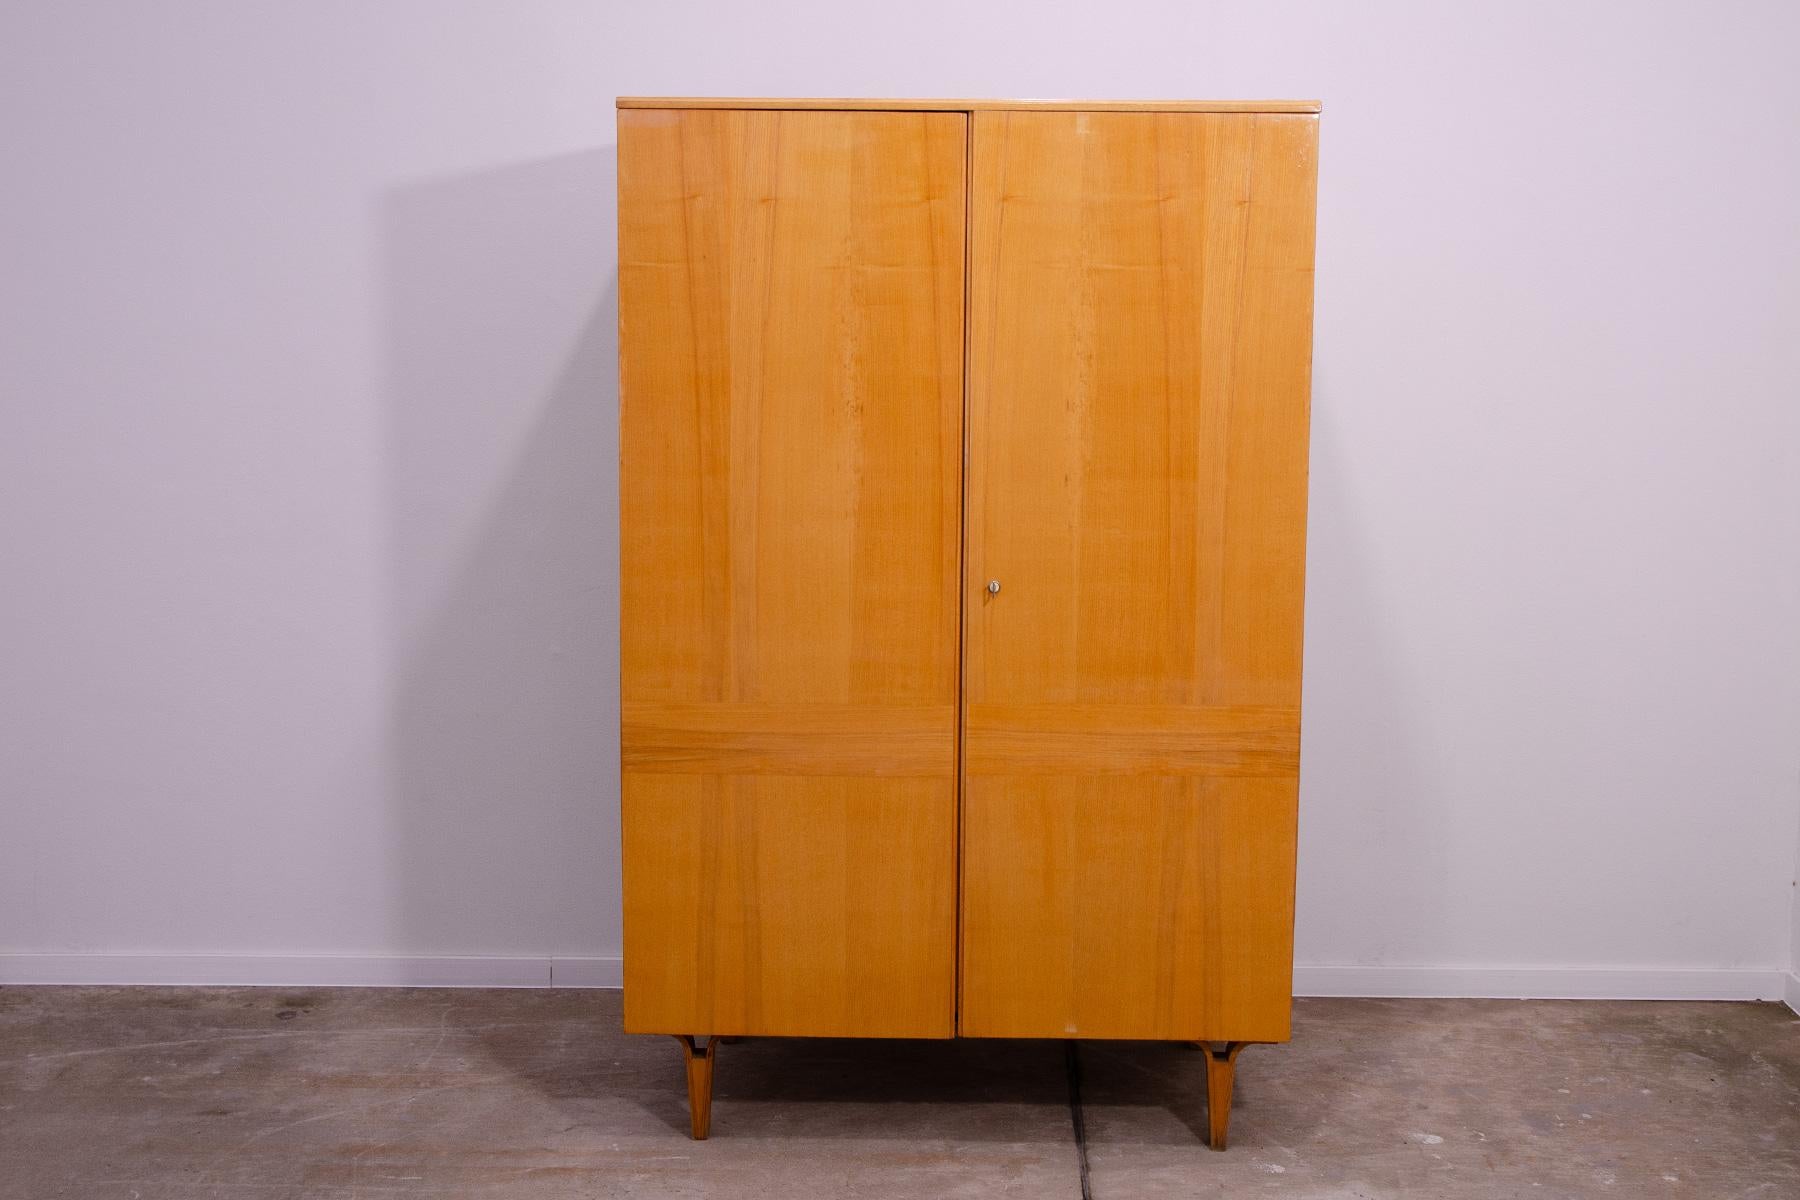 This Elegant vintage wardrobe was made by Nový Domov company in the former Czechoslovakia in the 1970´s. Four massive shelves for clothes inside. In good Vintage condition, showing signs ao age and using. It´s made of ash wood and plywood.

Height: